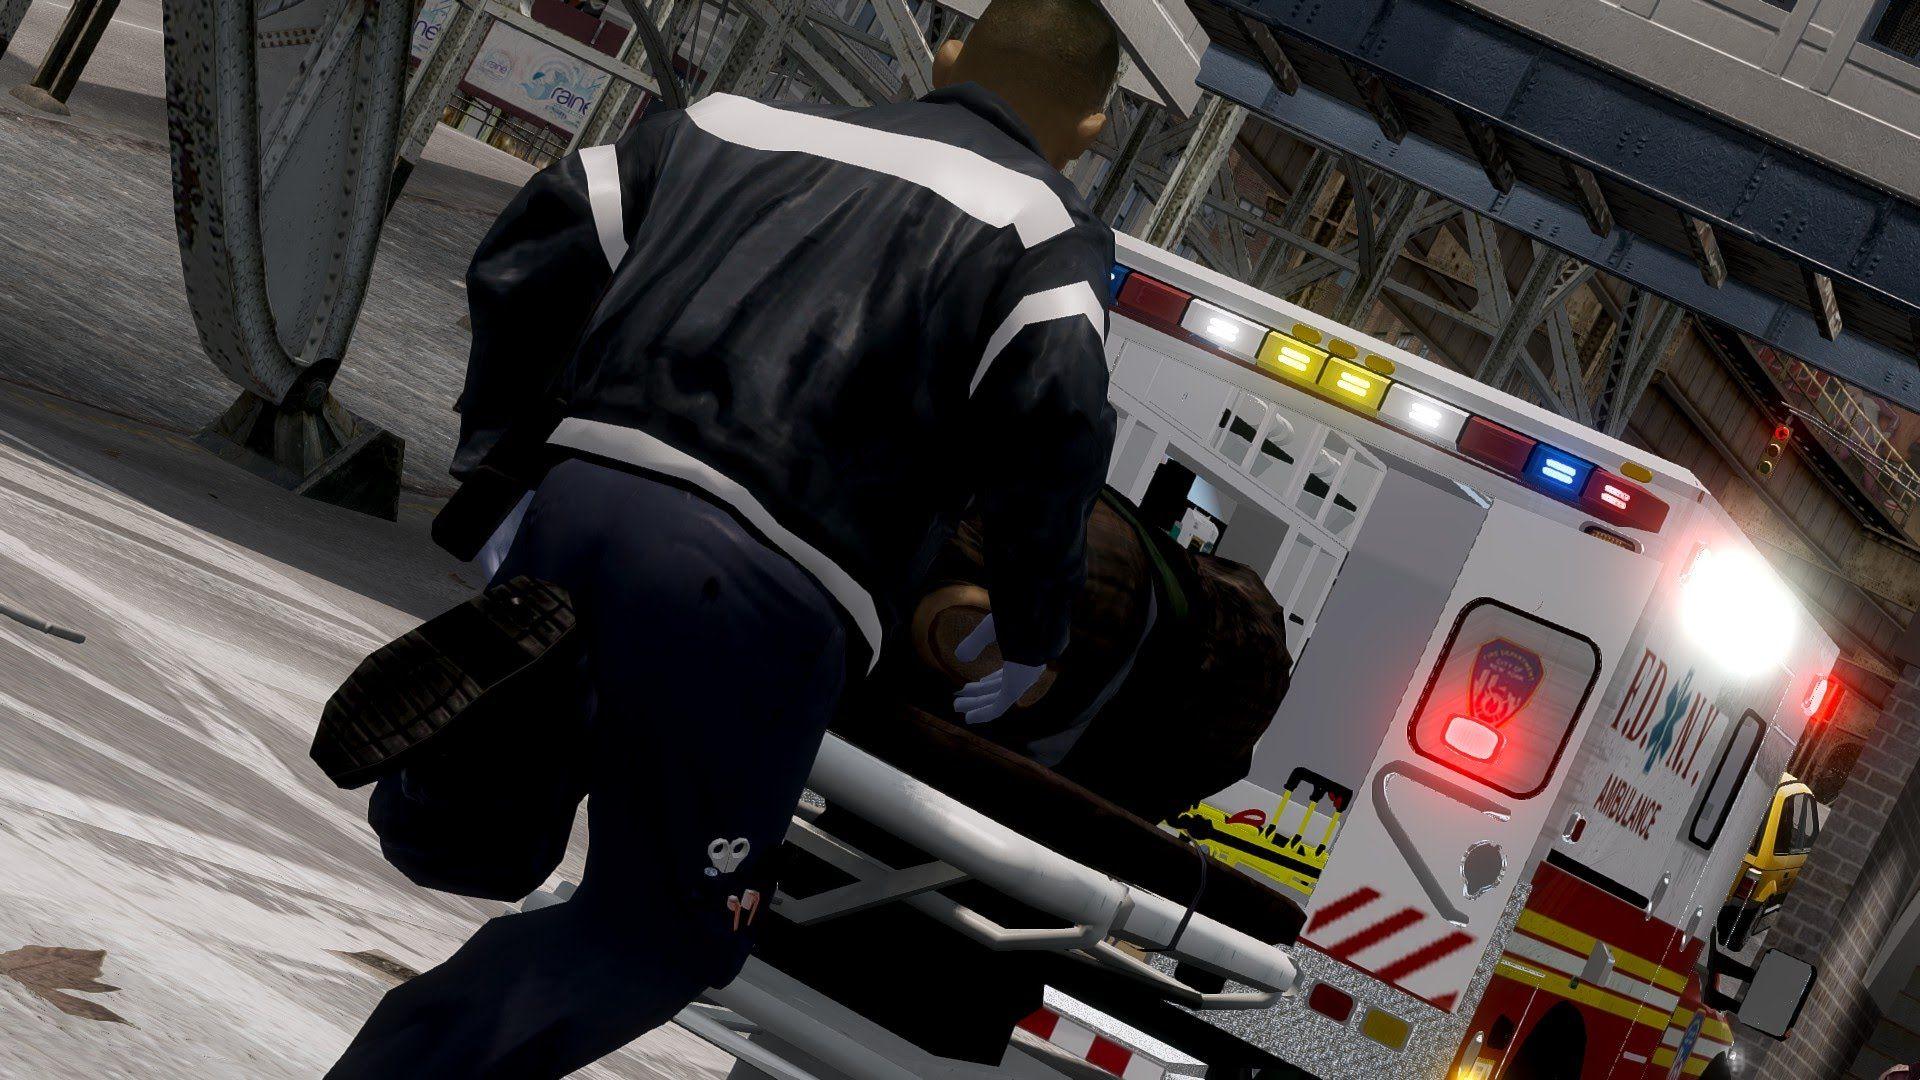 First Look at the Firefighter Mod Call GTA IV Script